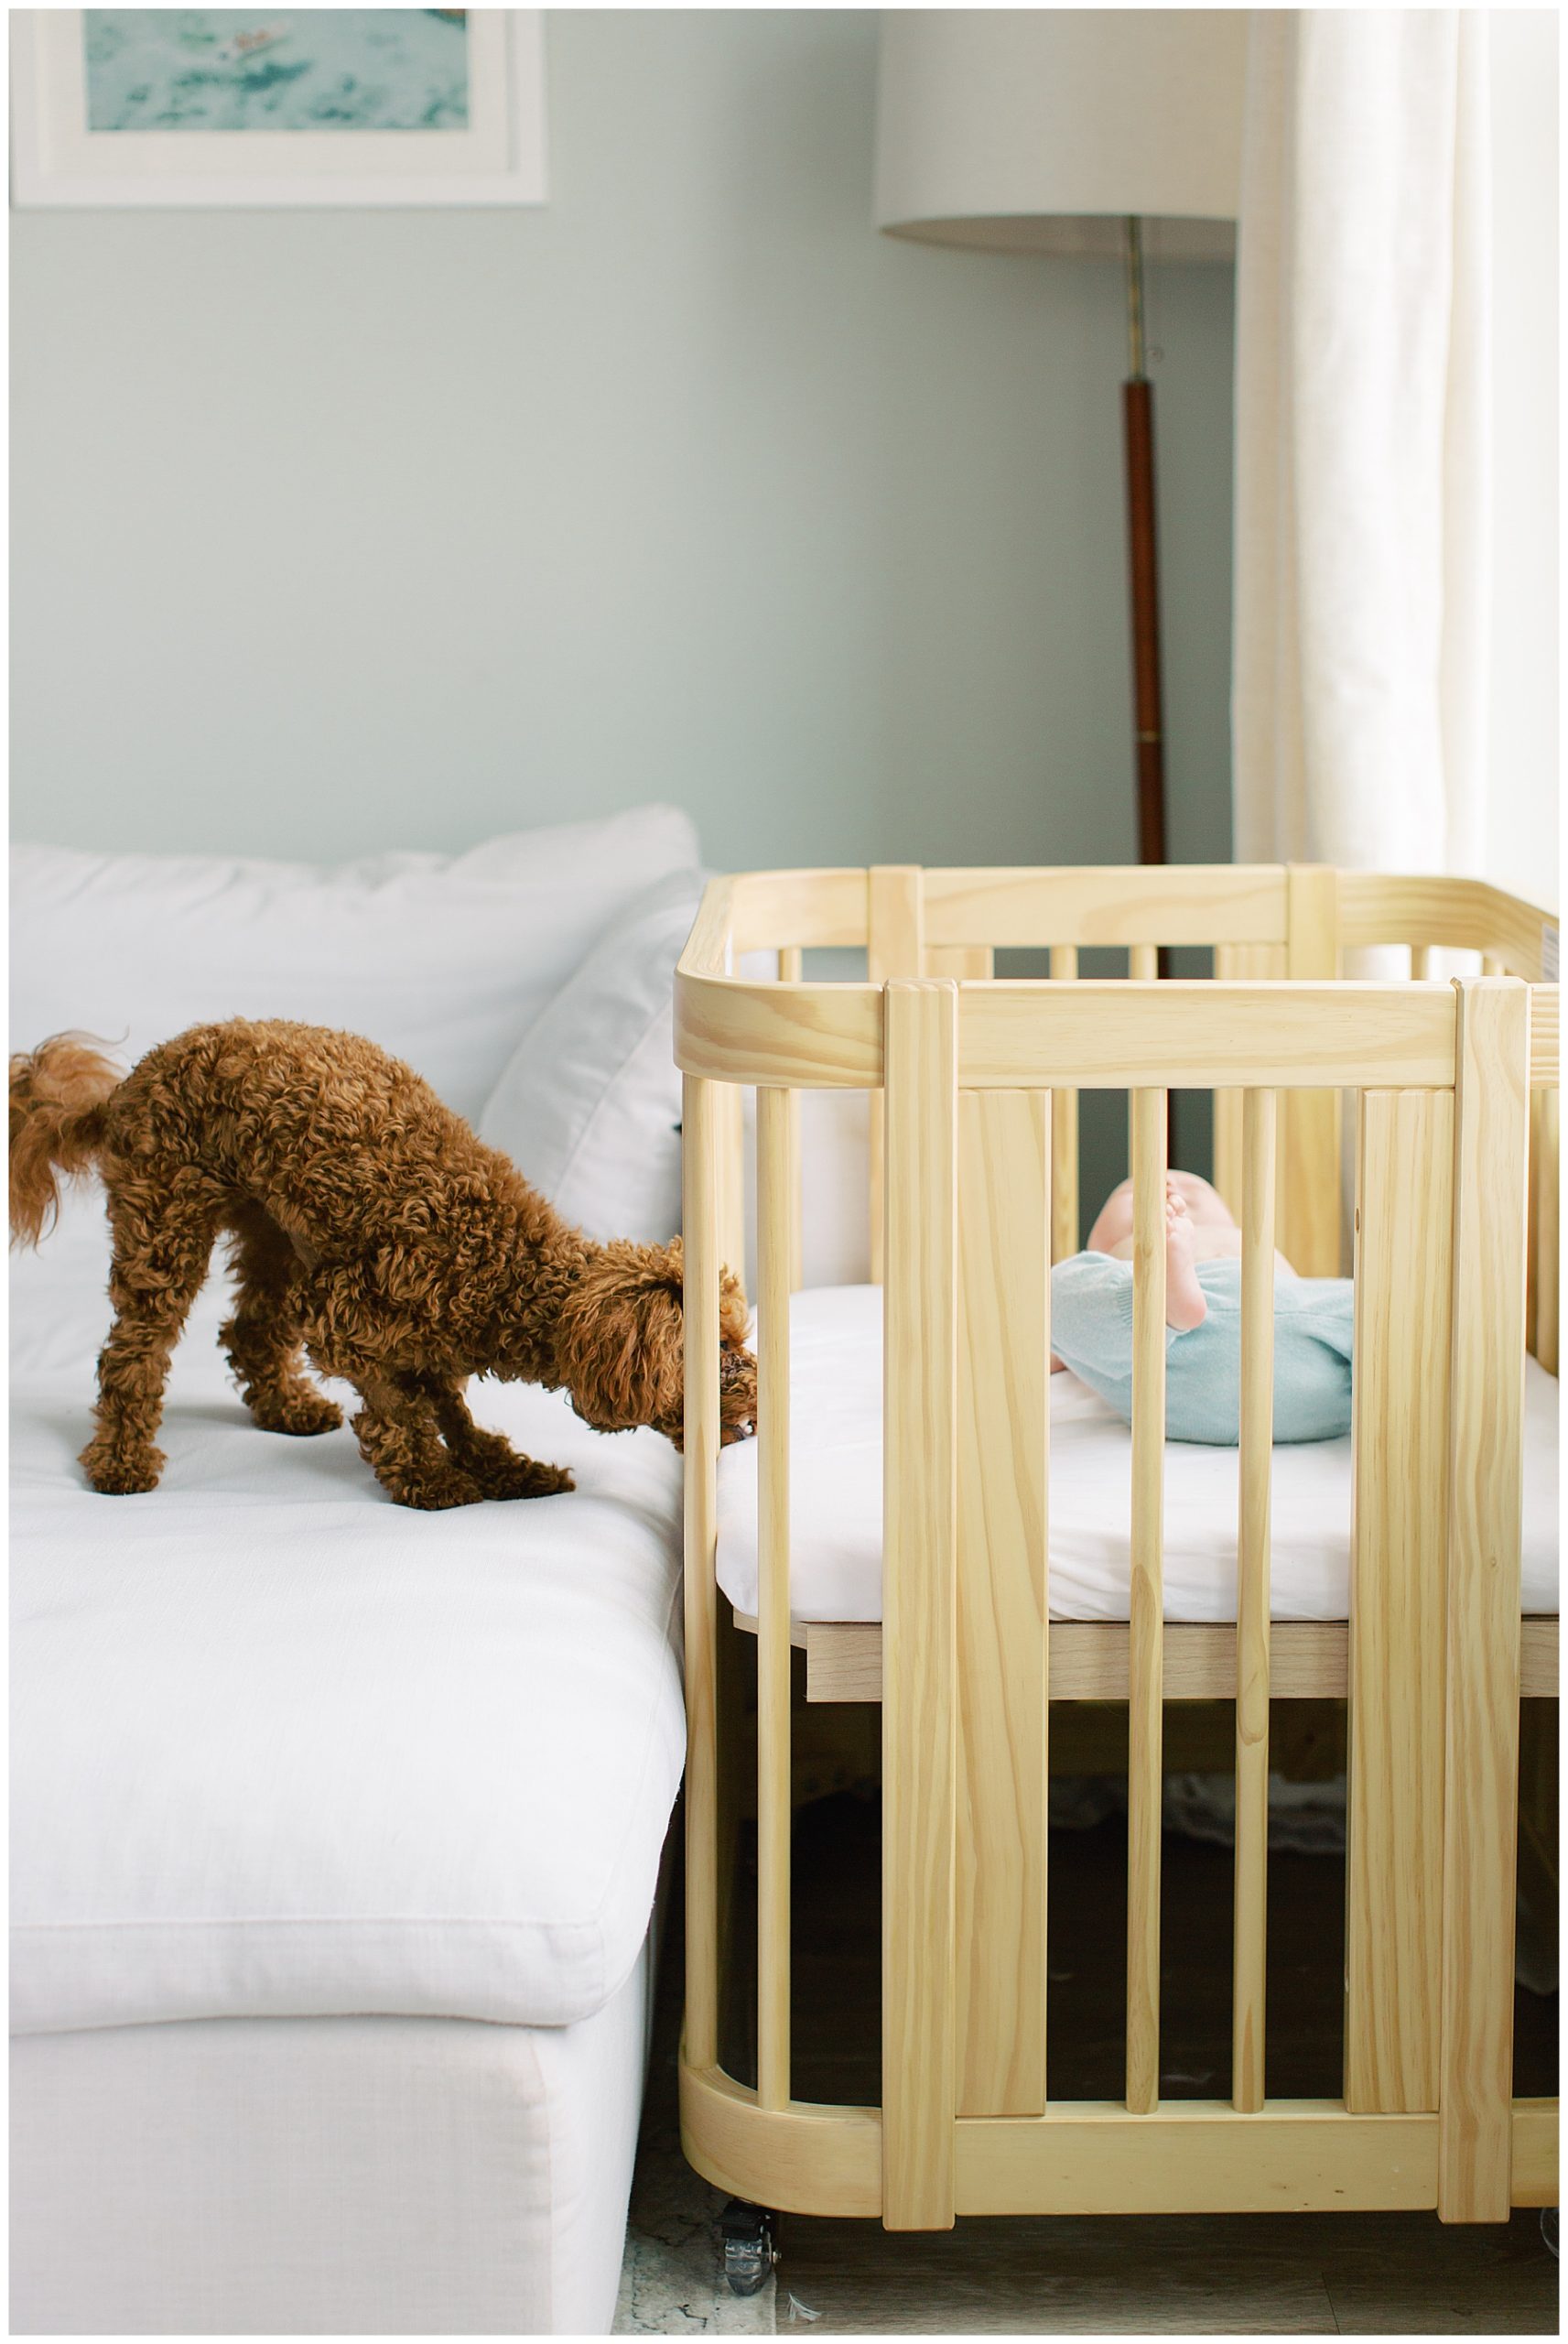 dog sniffs between bars of basinet with newborn baby inside 